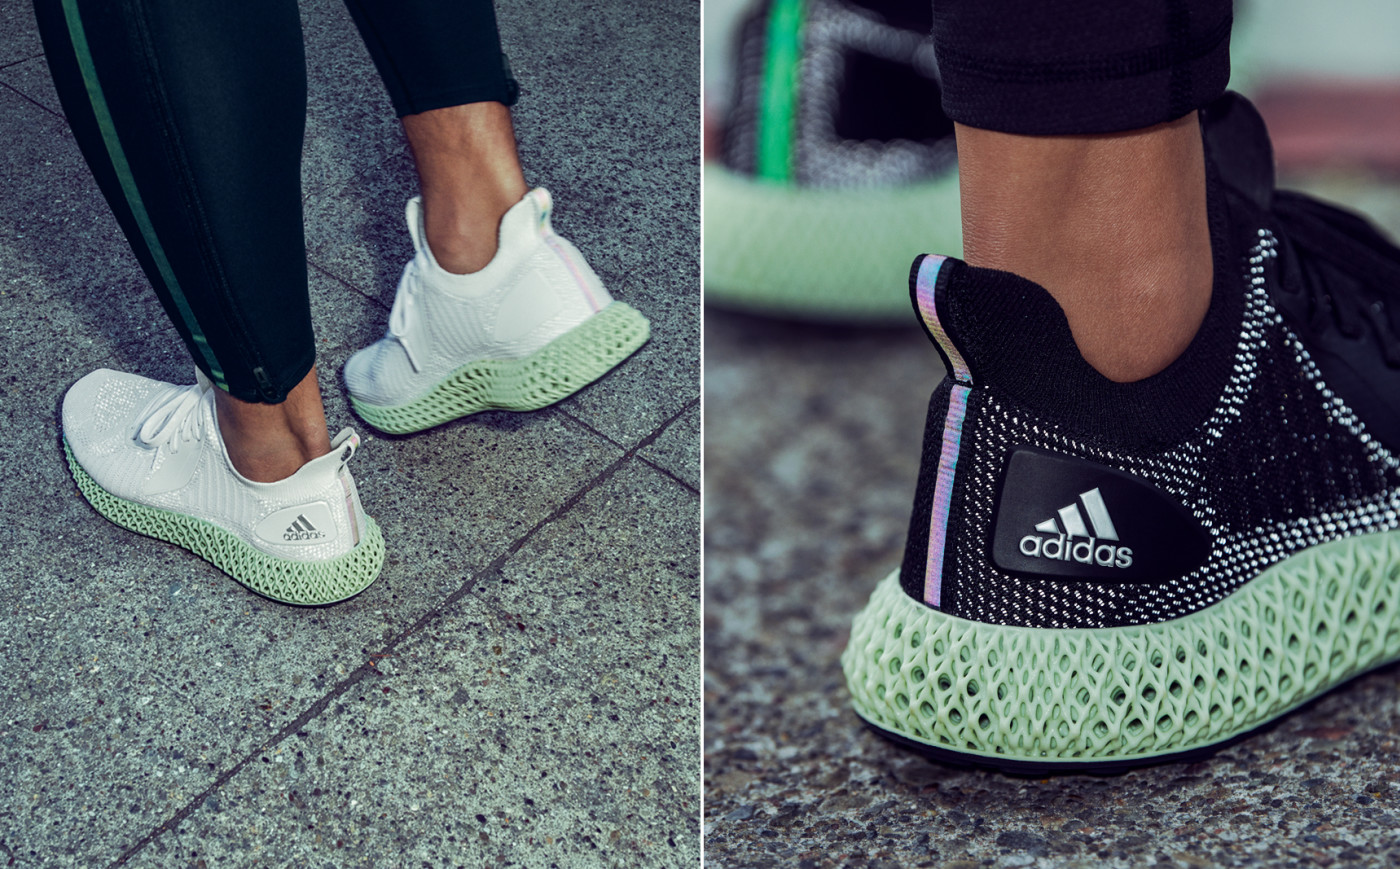 adidas Light up the Streets with the Reflective ALPHAEDGE 4D ...